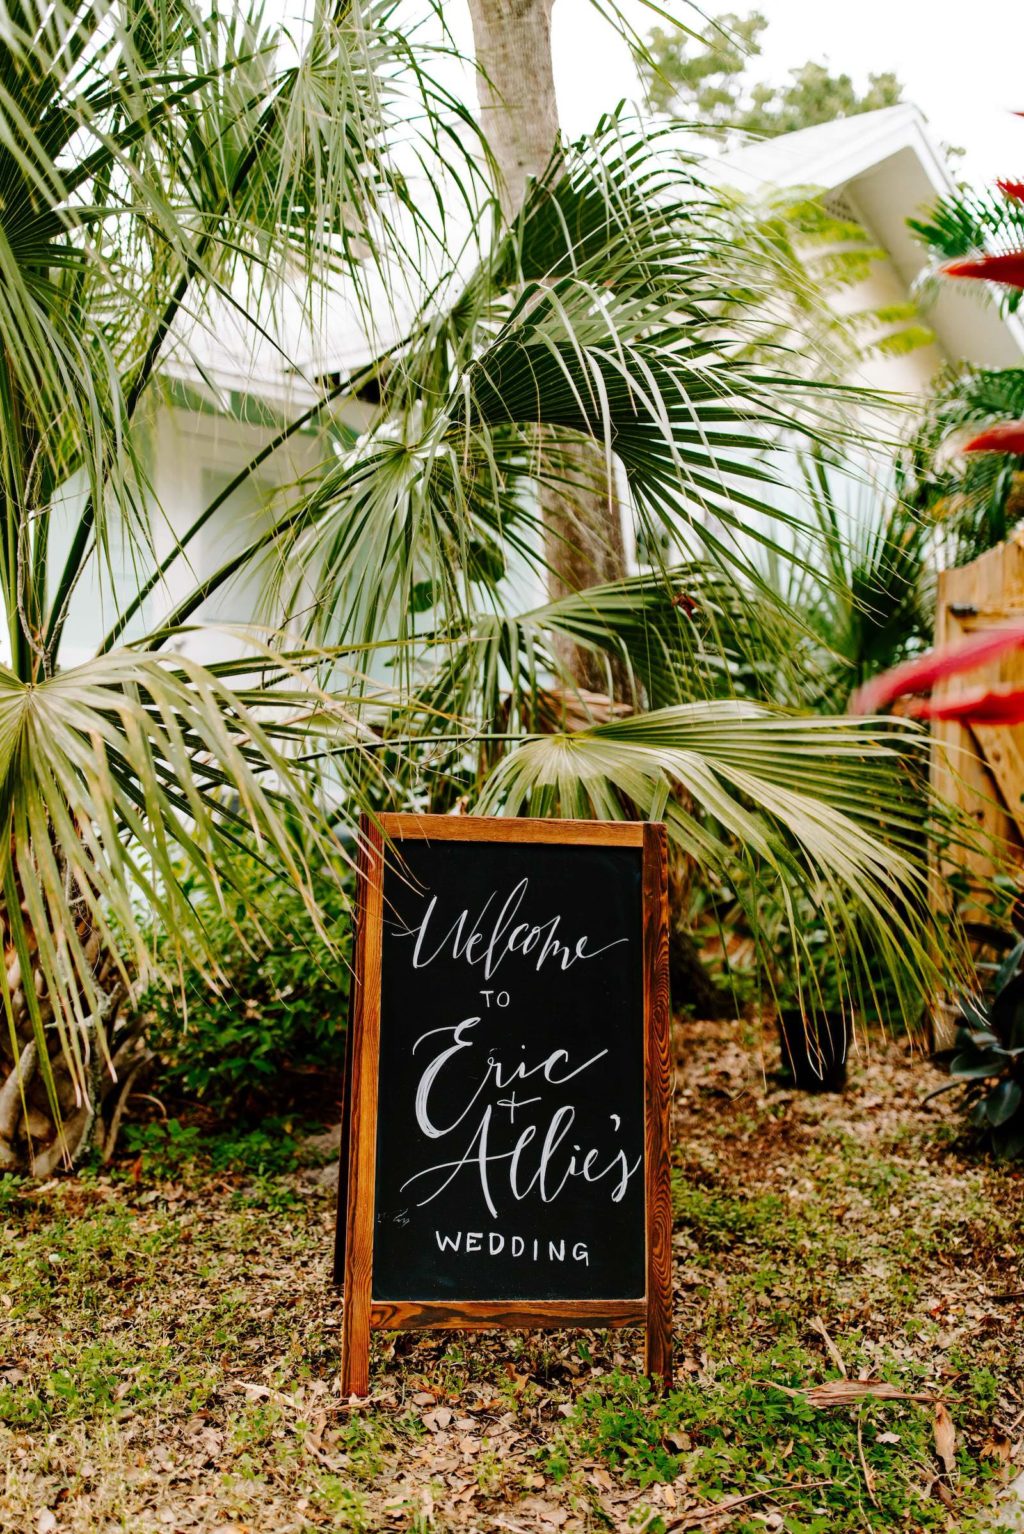 Tampa Bay Outdoor Wedding Details and Decor, Welcome Sign with Chalkboard Writing | Florida Wedding Planner Parties A'La Carte